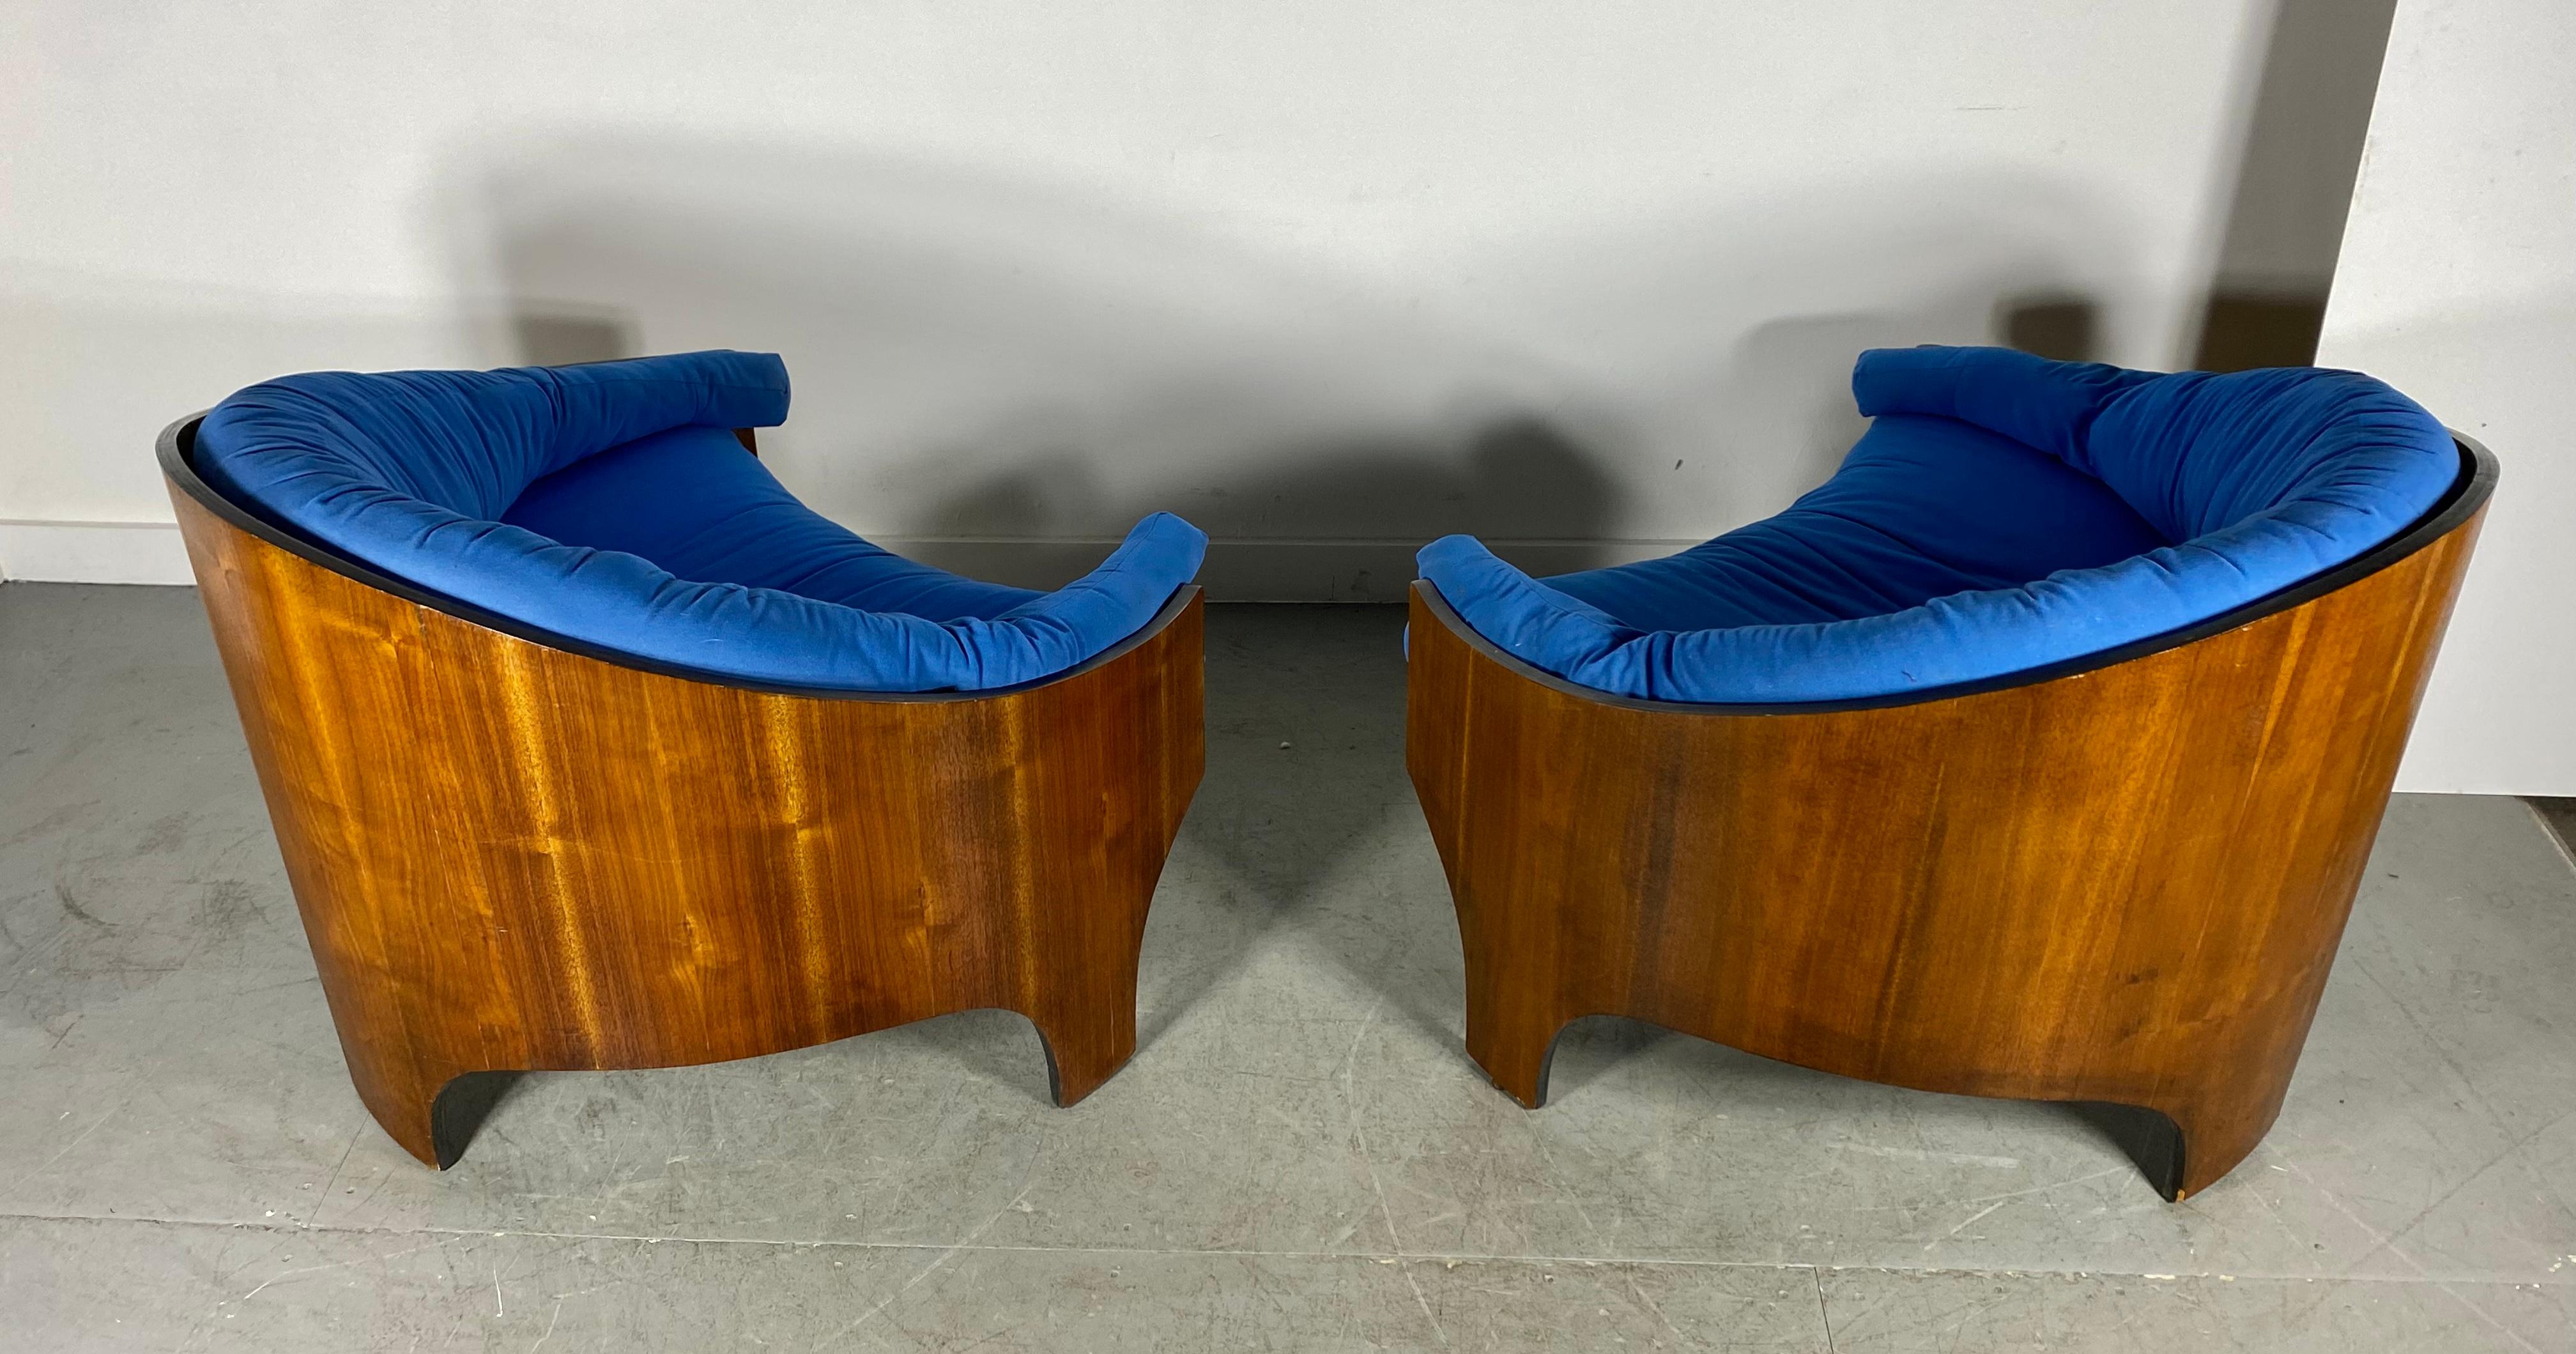 Henry Glass Intimate Island Lounge Chairs Stunning Moulded Walnut For Sale 6